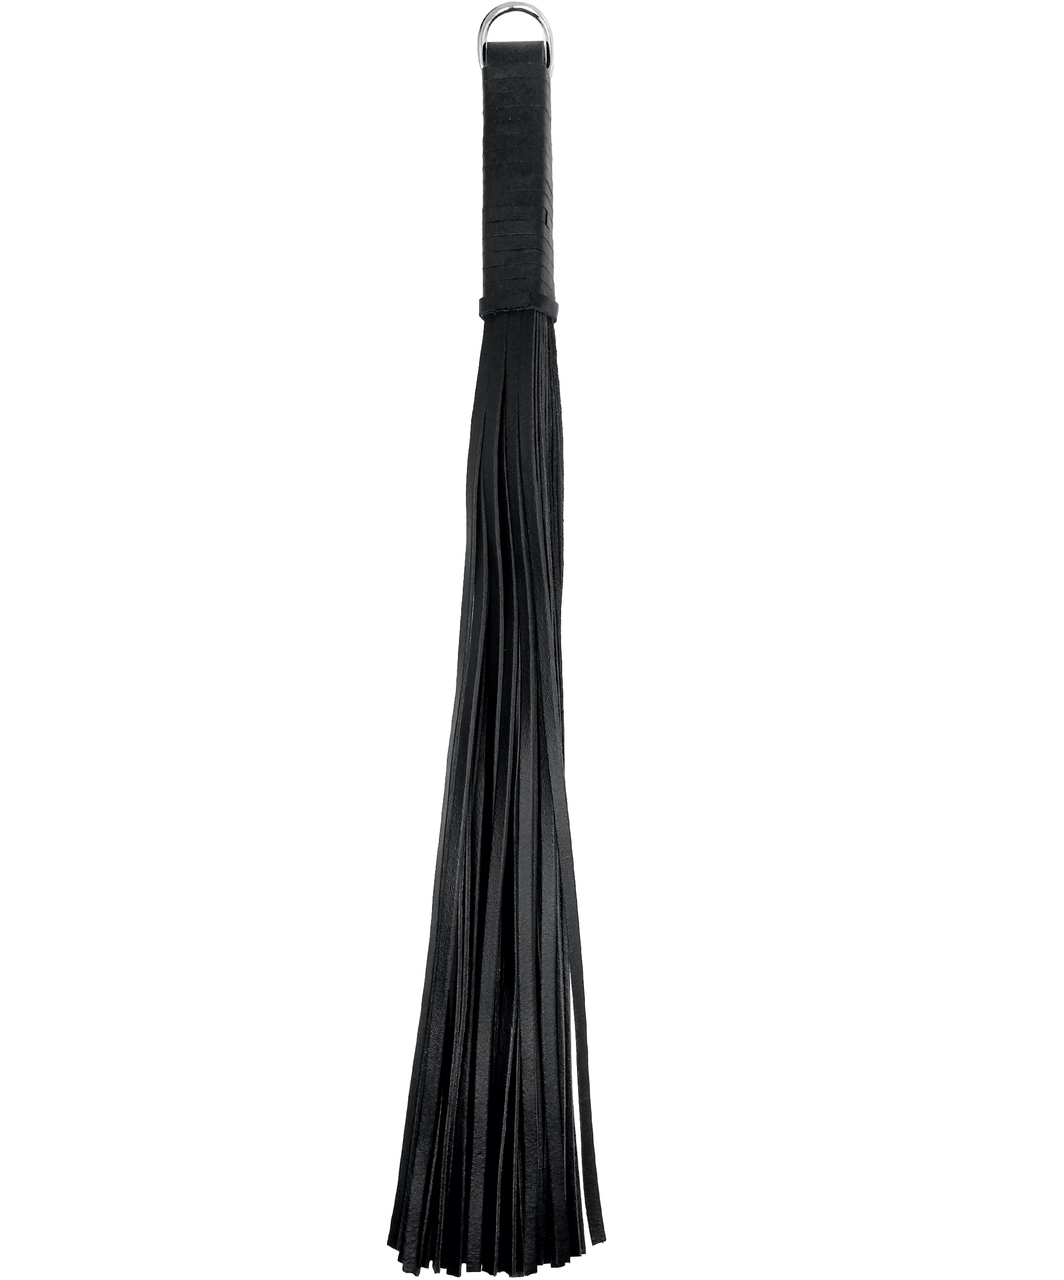 SexyStyle black leather whip